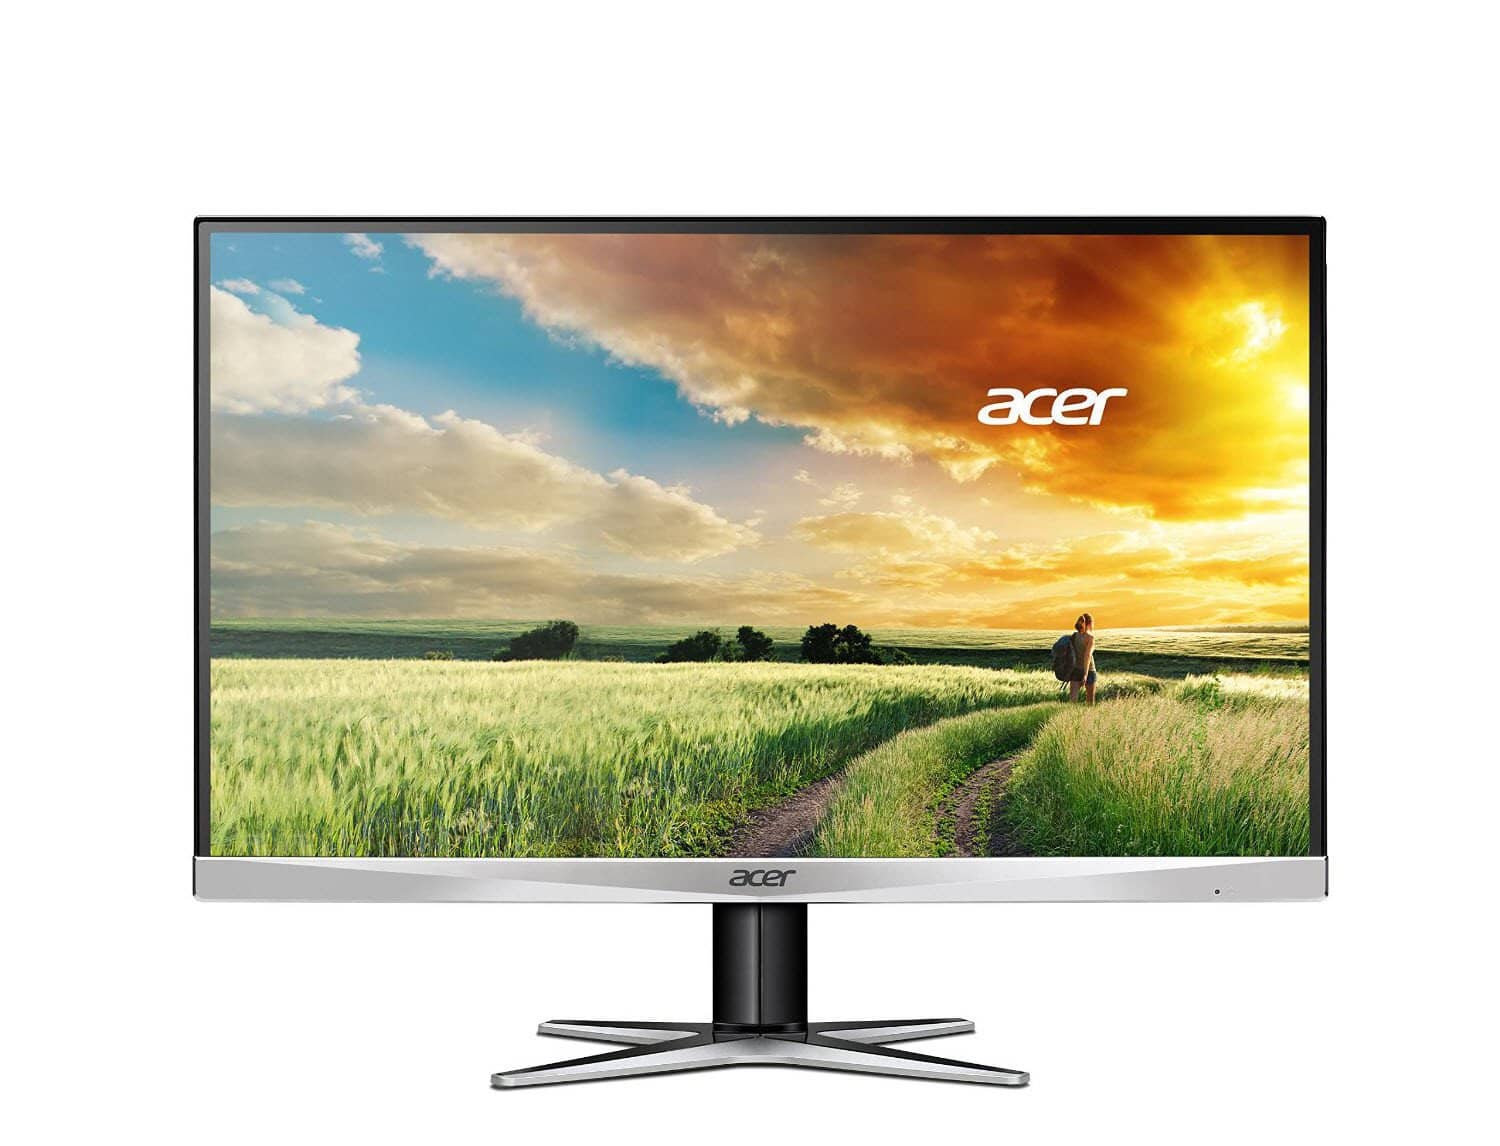 Acer G257HU smidpx 25-Inch